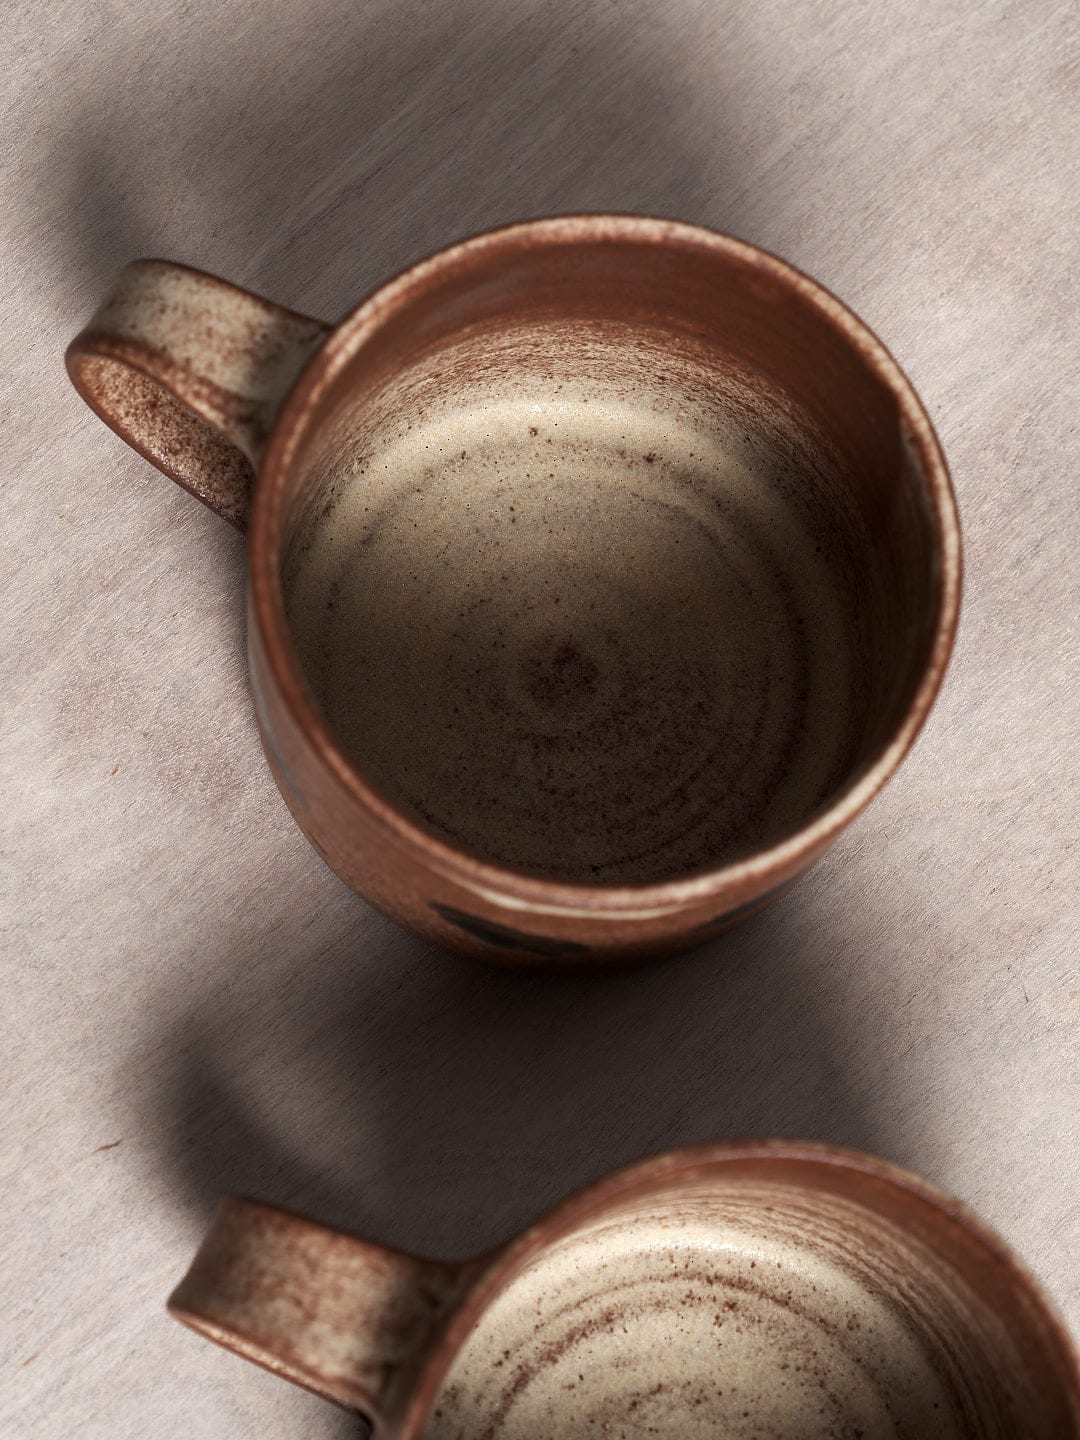 Two handmade Zoë Isaacs Stripes mugs with a matte cream glaze on a wooden surface.